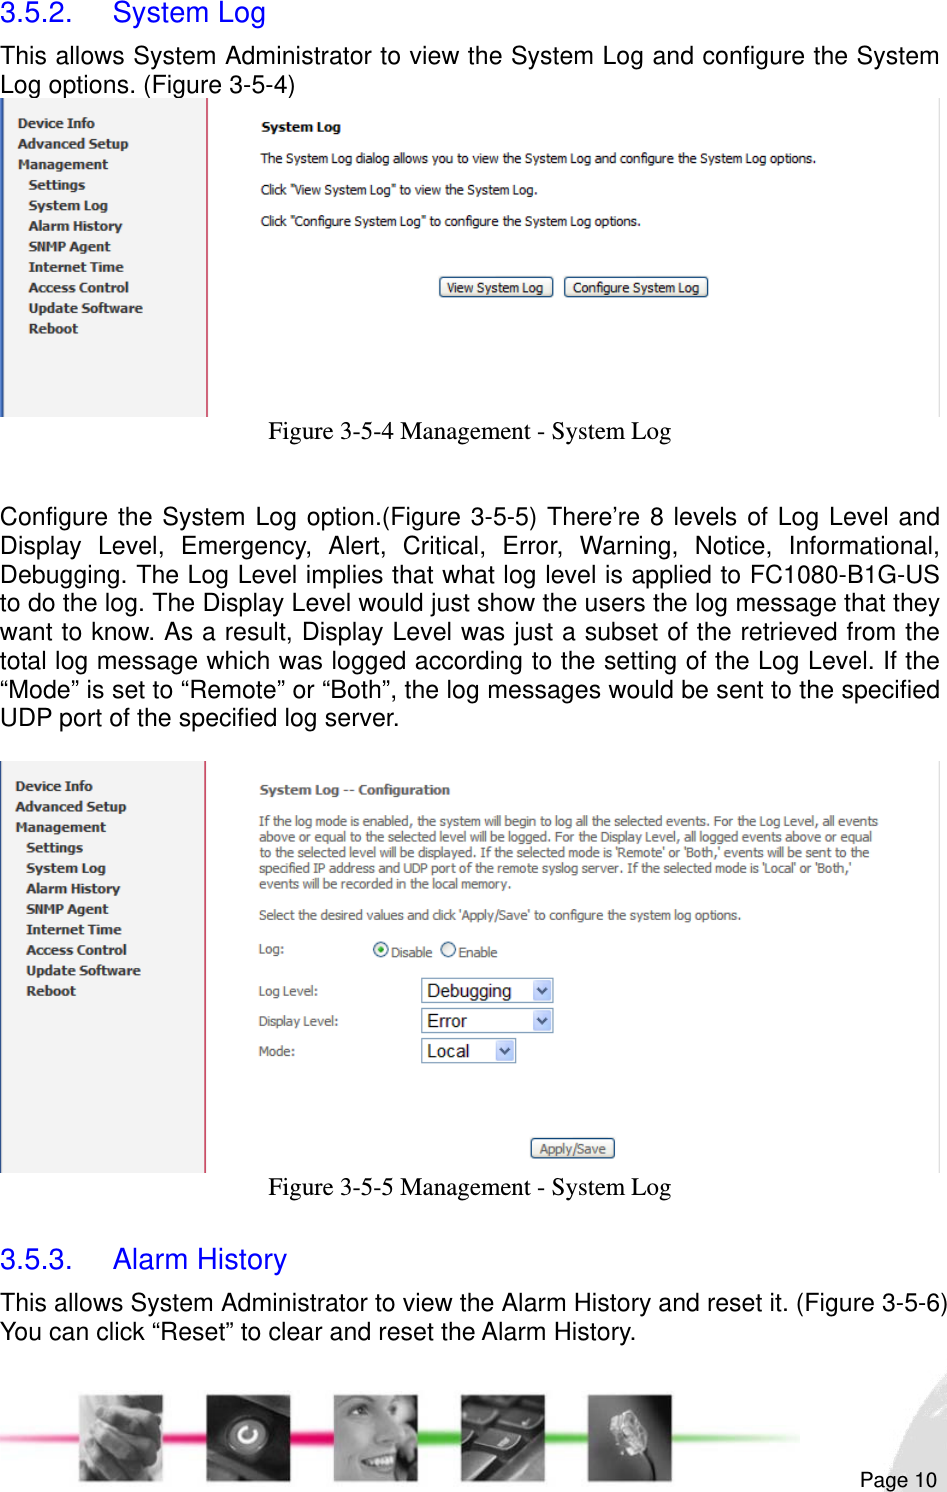                                                                                                                                                                                                       3.5.2. System Log This allows System Administrator to view the System Log and configure the System Log options. (Figure 3-5-4)  Figure 3-5-4 Management - System Log   Configure the System Log option.(Figure 3-5-5) There’re 8 levels of Log Level and Display Level, Emergency, Alert, Critical, Error, Warning, Notice, Informational, Debugging. The Log Level implies that what log level is applied to FC1080-B1G-US to do the log. The Display Level would just show the users the log message that they want to know. As a result, Display Level was just a subset of the retrieved from the total log message which was logged according to the setting of the Log Level. If the “Mode” is set to “Remote” or “Both”, the log messages would be sent to the specified UDP port of the specified log server.   Figure 3-5-5 Management - System Log  3.5.3. Alarm History This allows System Administrator to view the Alarm History and reset it. (Figure 3-5-6) You can click “Reset” to clear and reset the Alarm History.  Page 10 